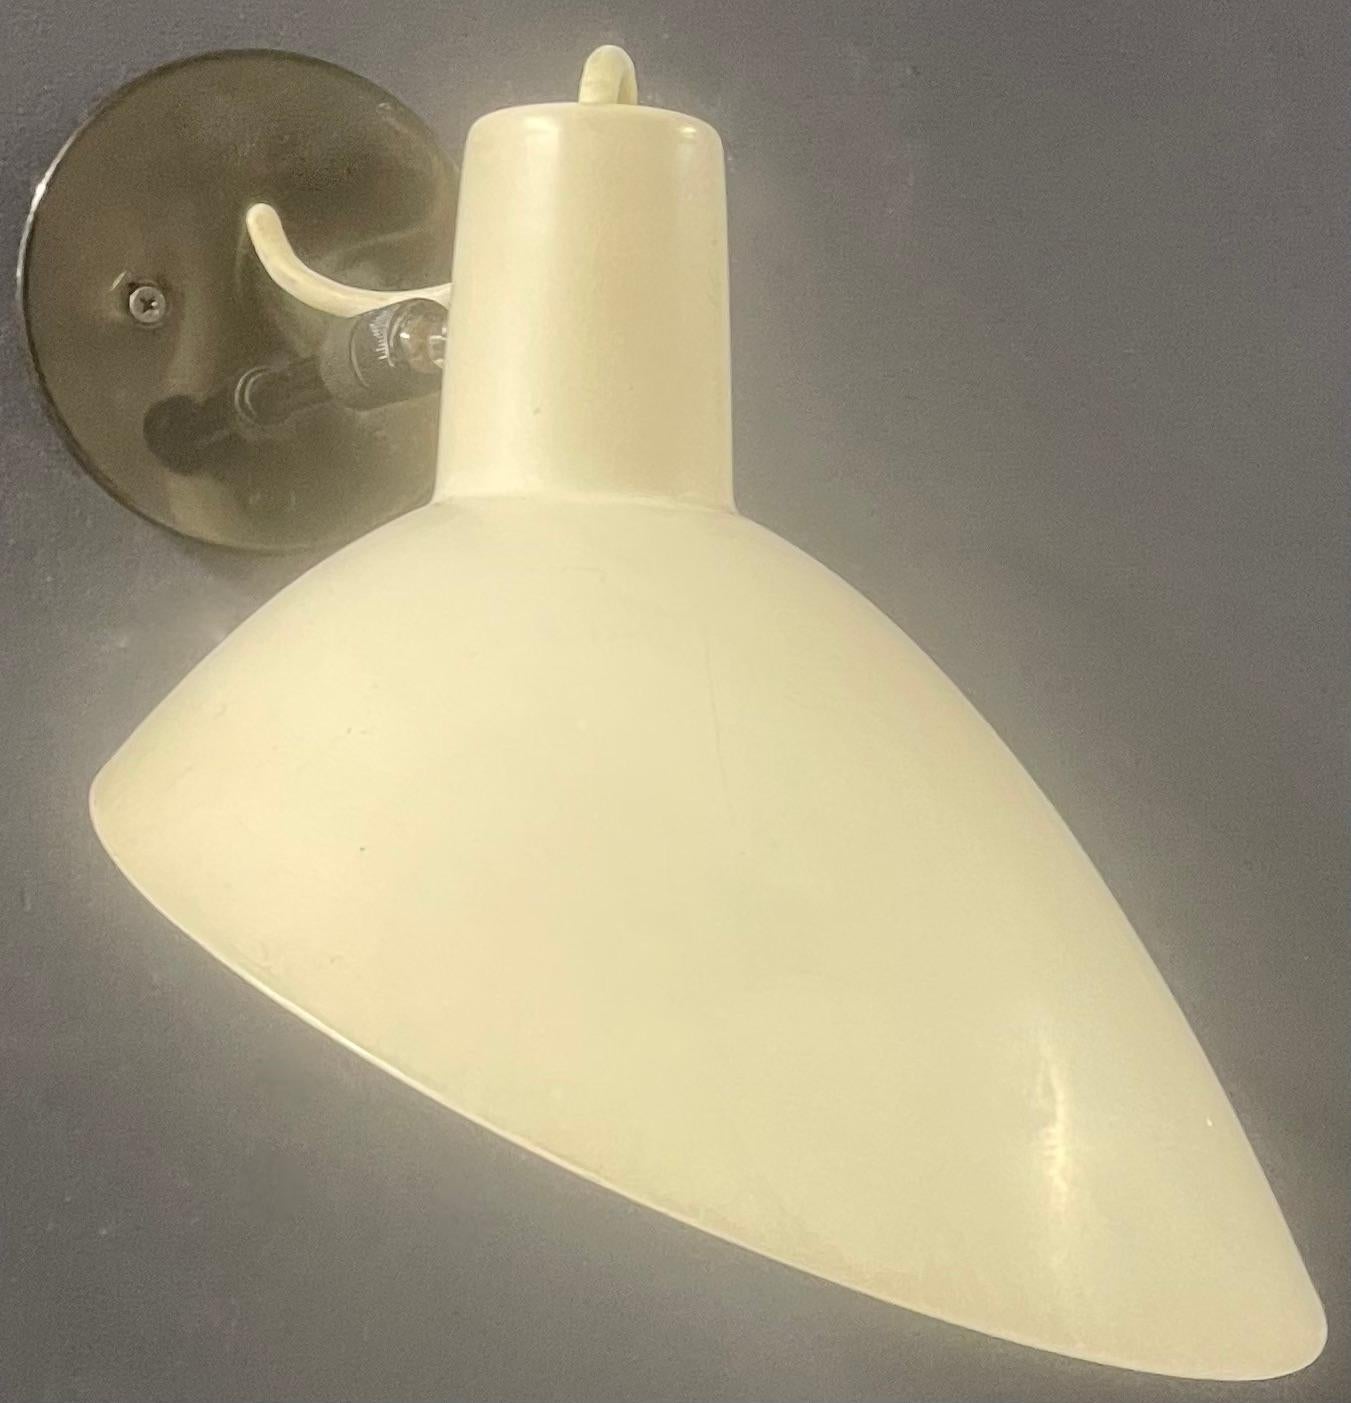 nice wallsconce by arteluce - we can offer a few in various versions...